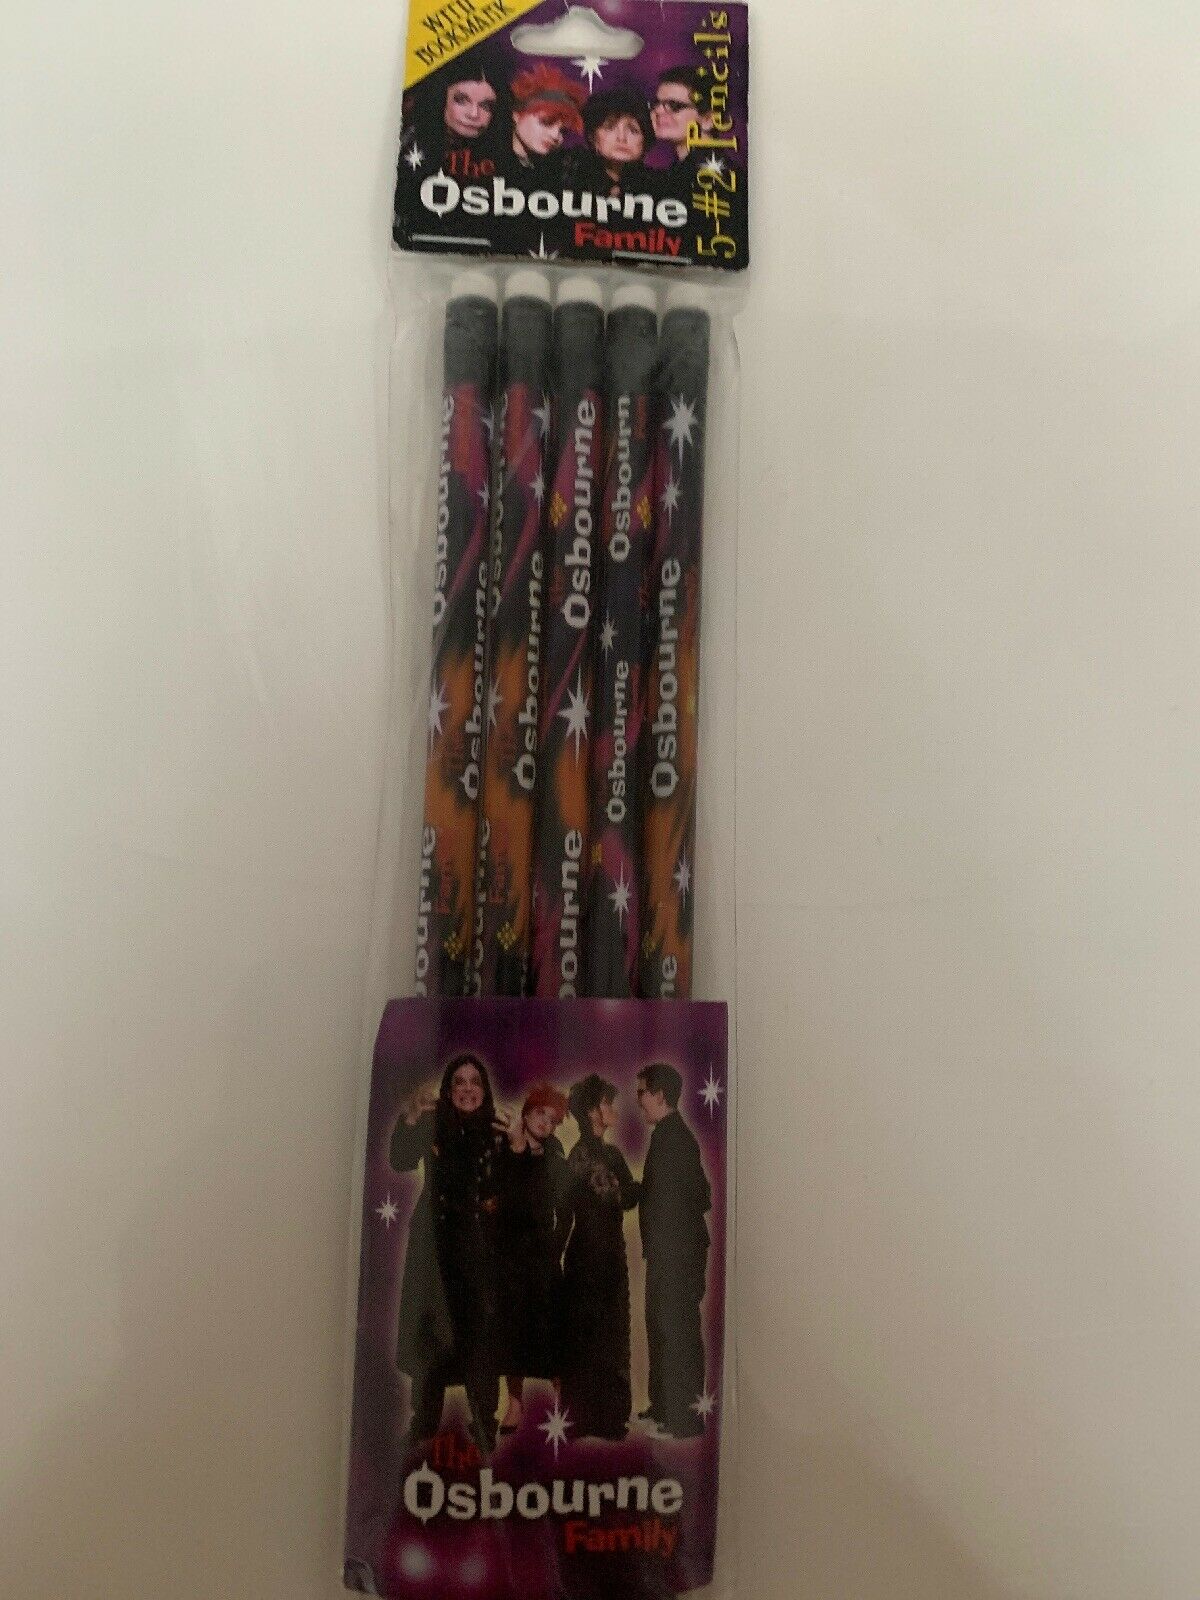 2002 The Ozzy Osbourne Family 5 Set Of Pencils With Book Mark